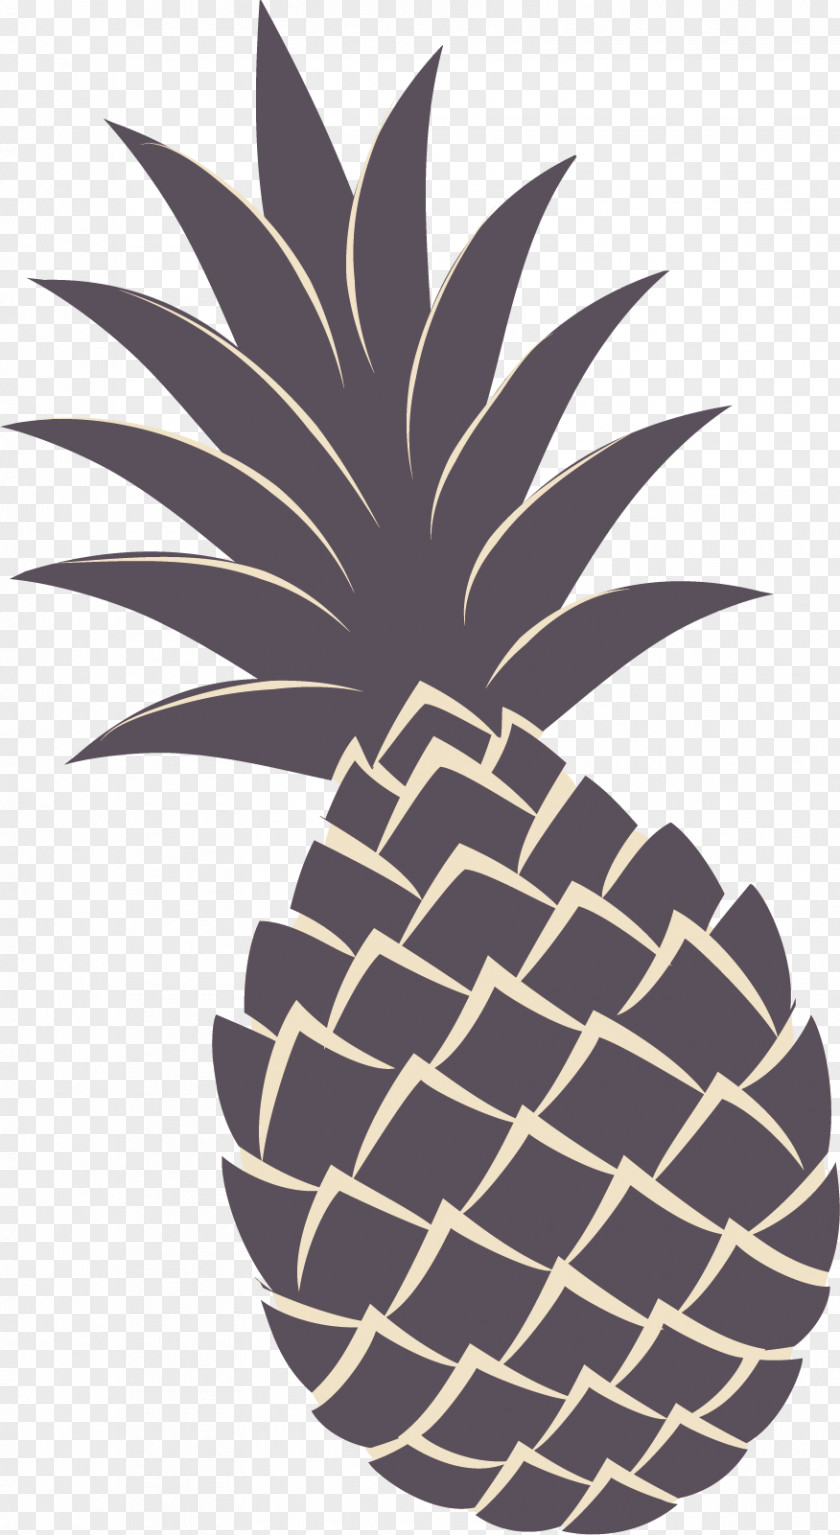 Abacaxi Silhouette Pineapple Bun Vector Graphics Clip Art Illustration PNG